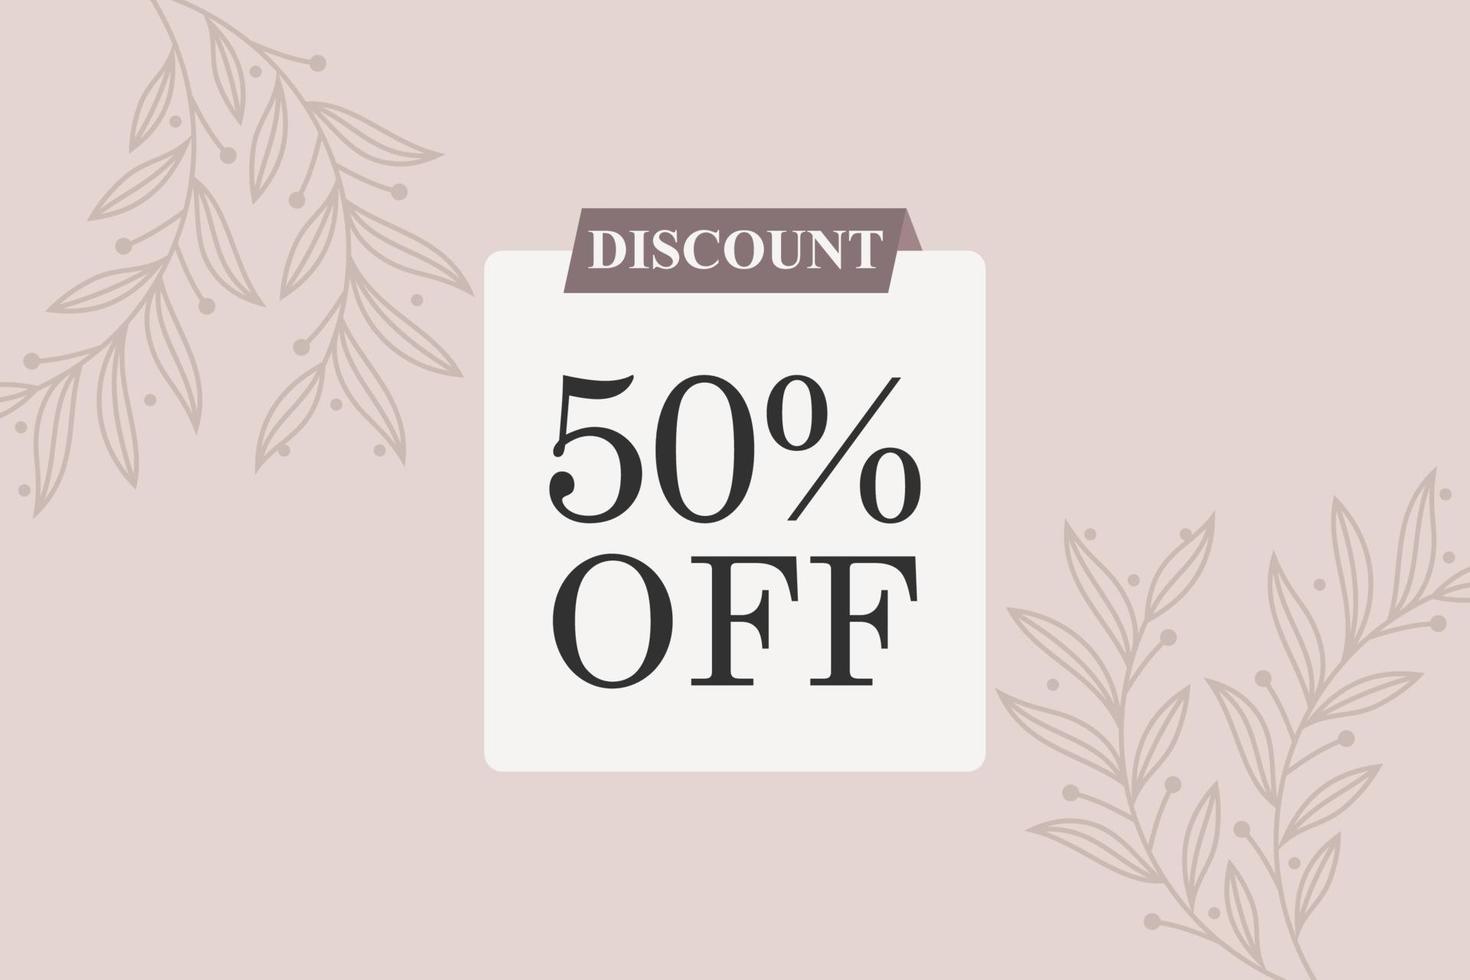 50 percent Sale and discount labels. price off tag icon flat design. vector